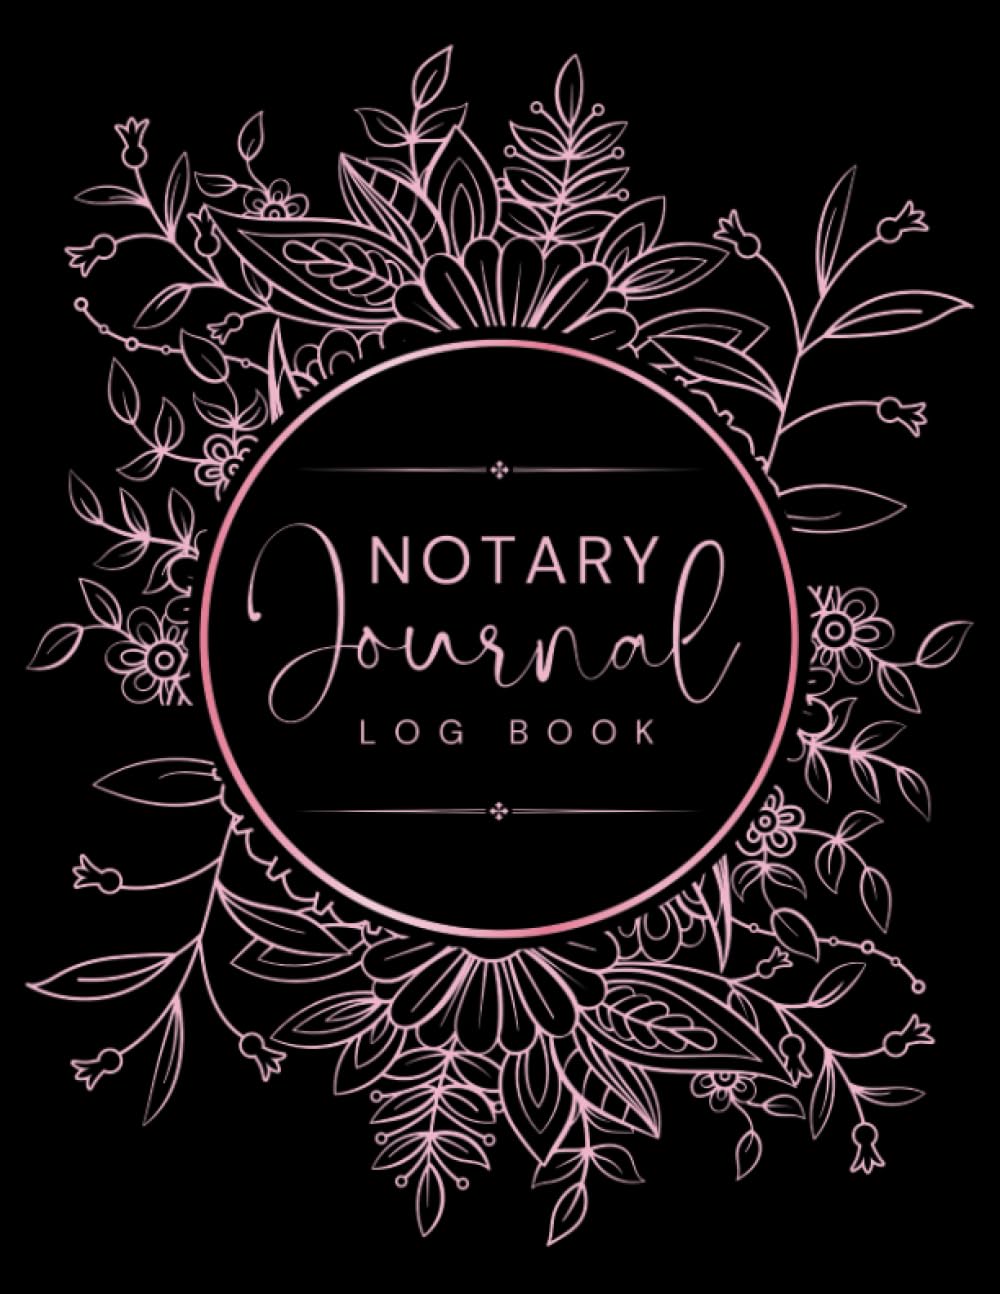 Notary Journal Log Book: Official Notary Log Book, Notary Public Record Book, With 230 Entries For Notarial Acts.